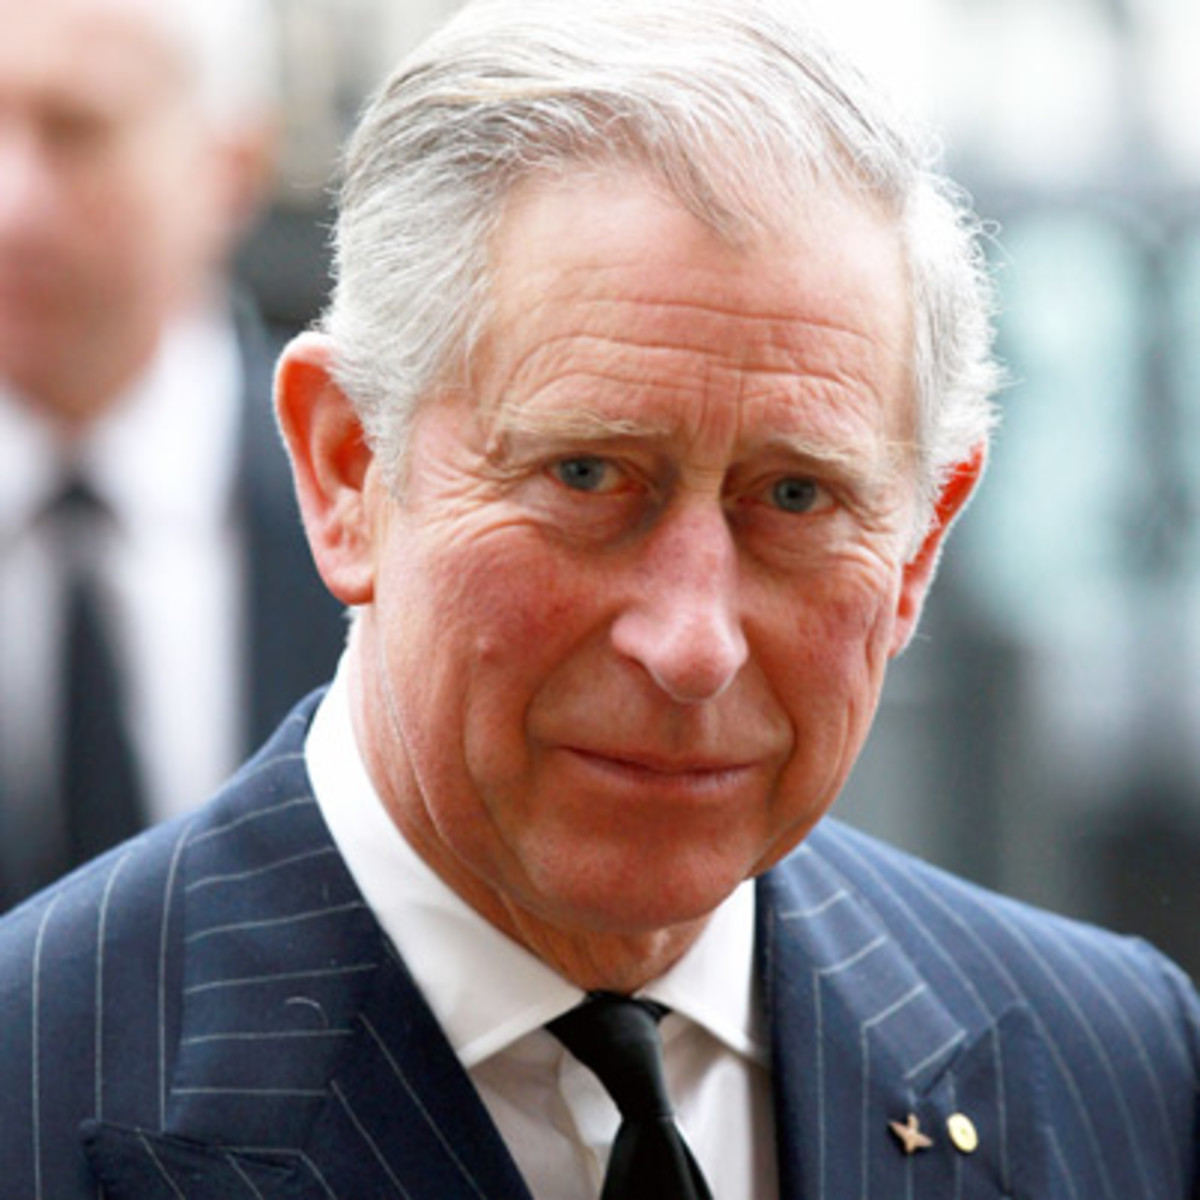 Prince Charles is expected to take over the British realm from his month Queen Elizabeth